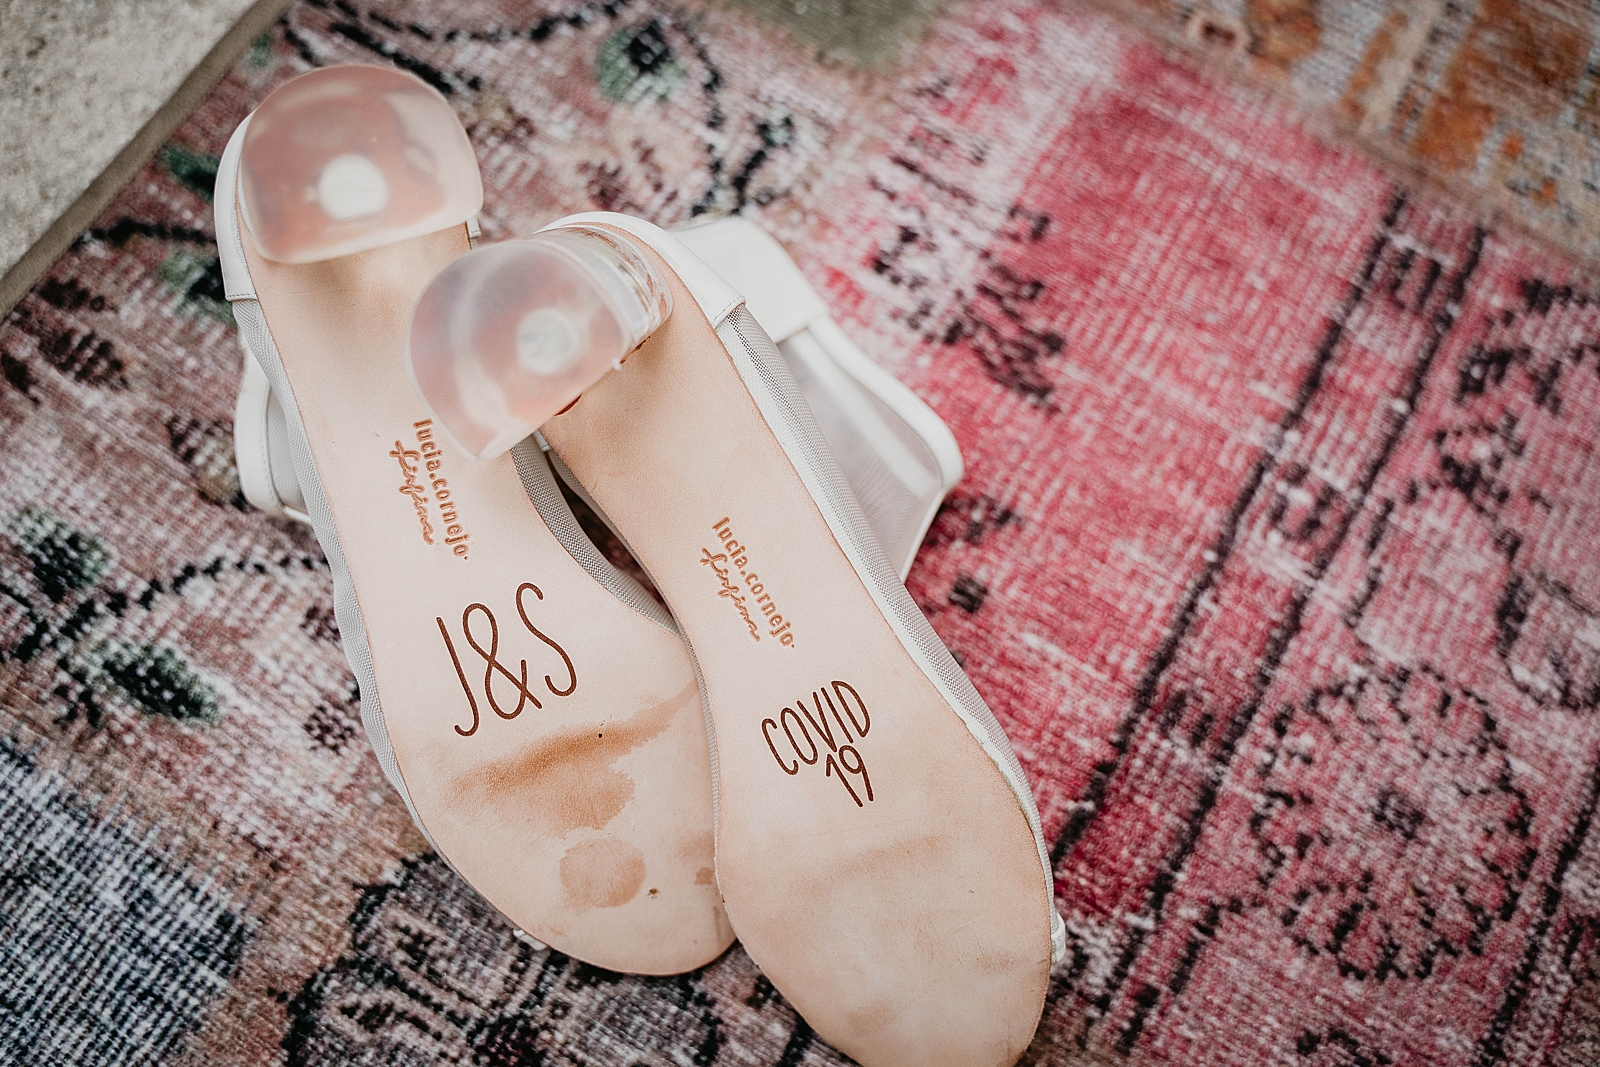 Detail shot of Wedding shoes with COVID-19 printed on them Intimate South Florida Wedding Photography captured by South Florida Wedding Photographer Krystal Capone Photography 